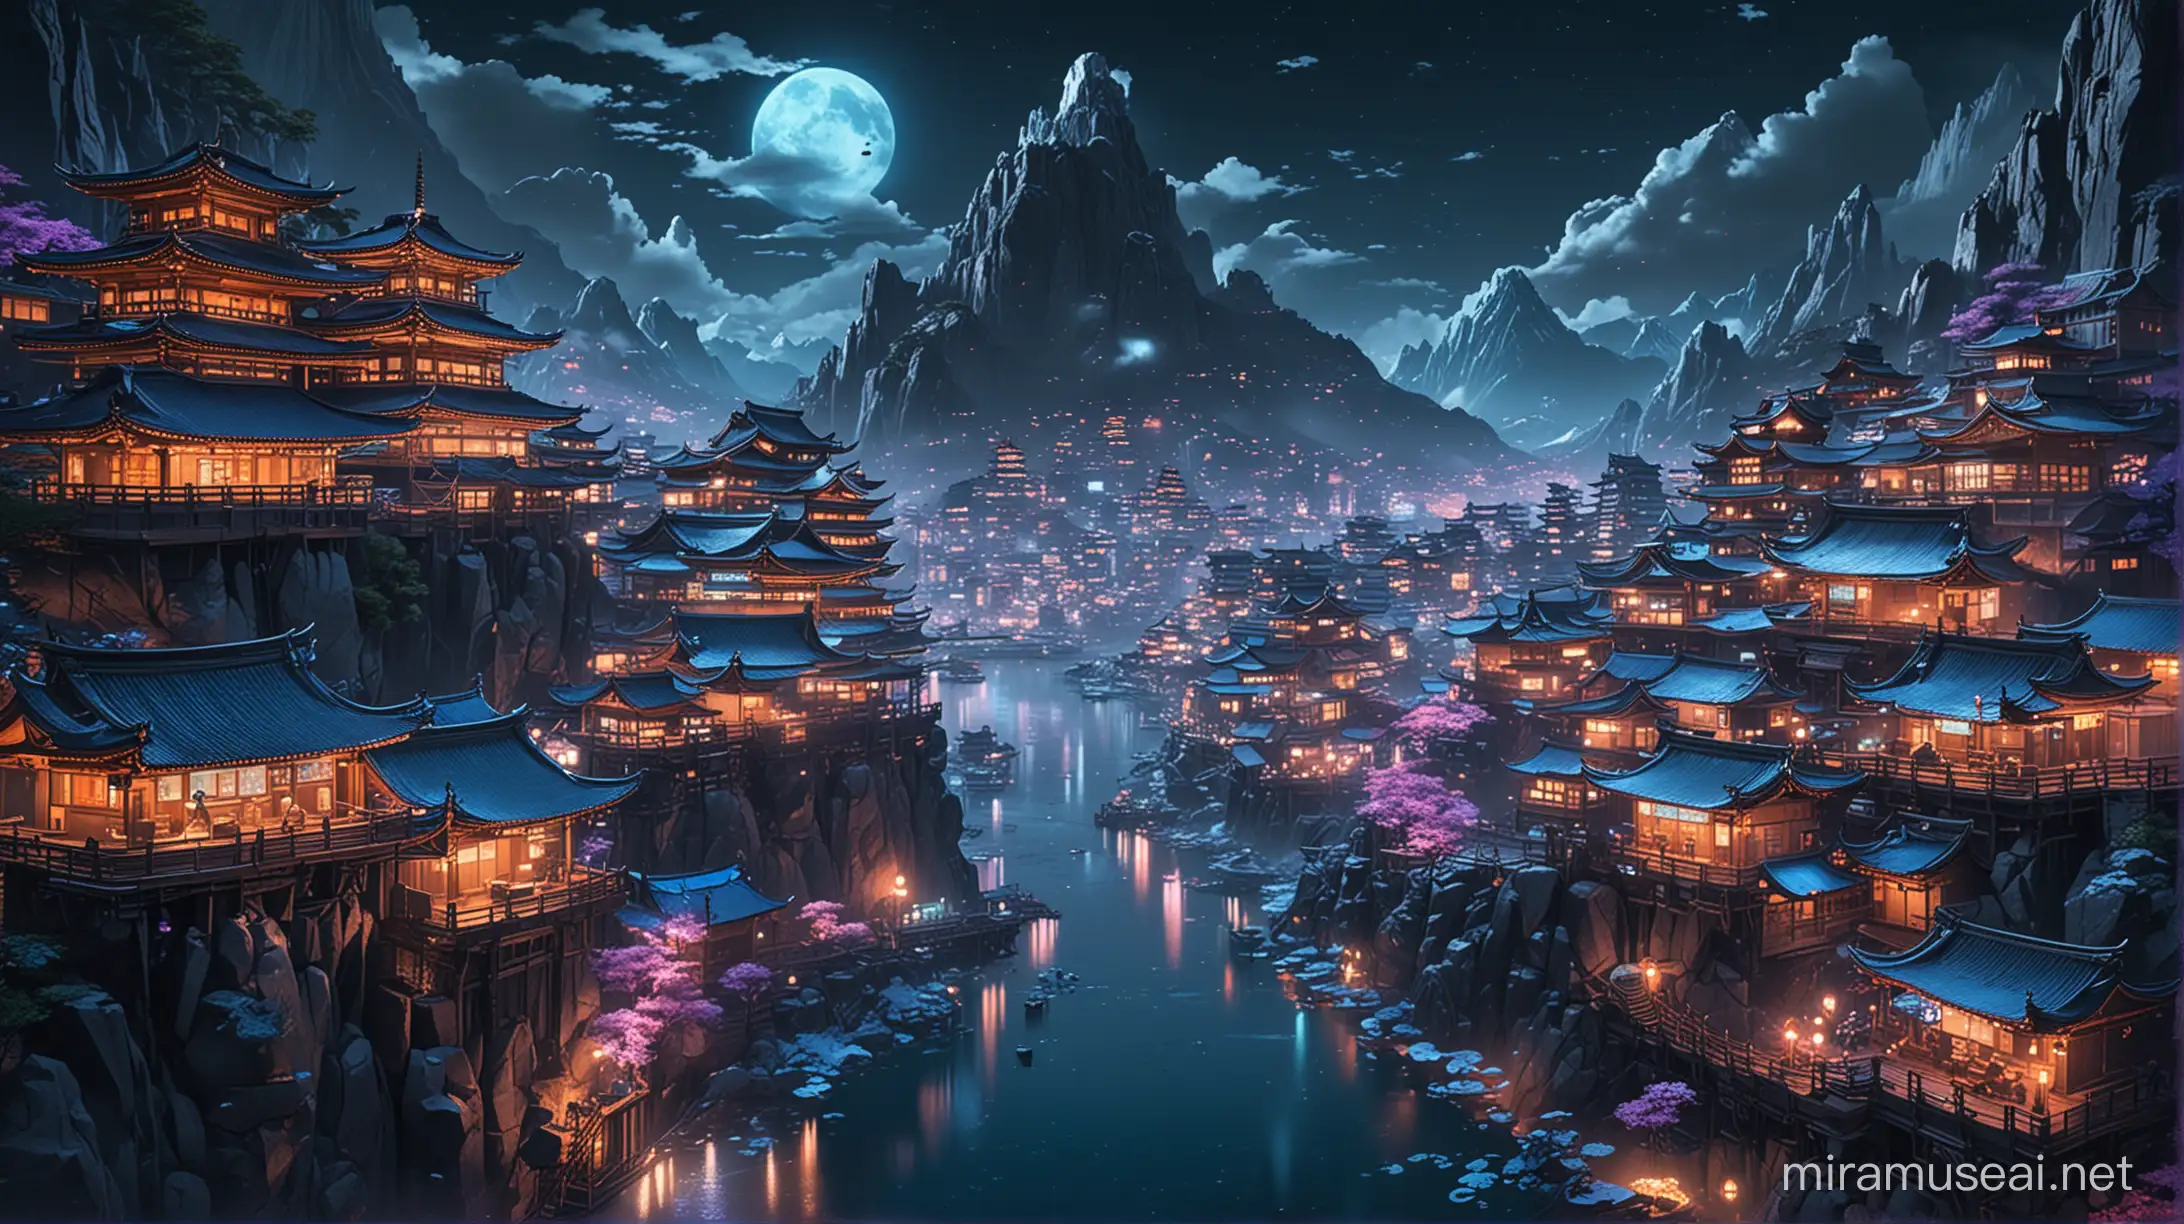 a beautiful thematic landscape of a magical ancient japanese themed kingdom in the cyberpunk village with multicolor lights hidden in an ocean style mountain range mixed with water and buildings made with water flow in the architexture blue roofs, multicolor scifi lights cyberpunk animals patroling flying and swimming desolation floating ice rocks beautiful hd
